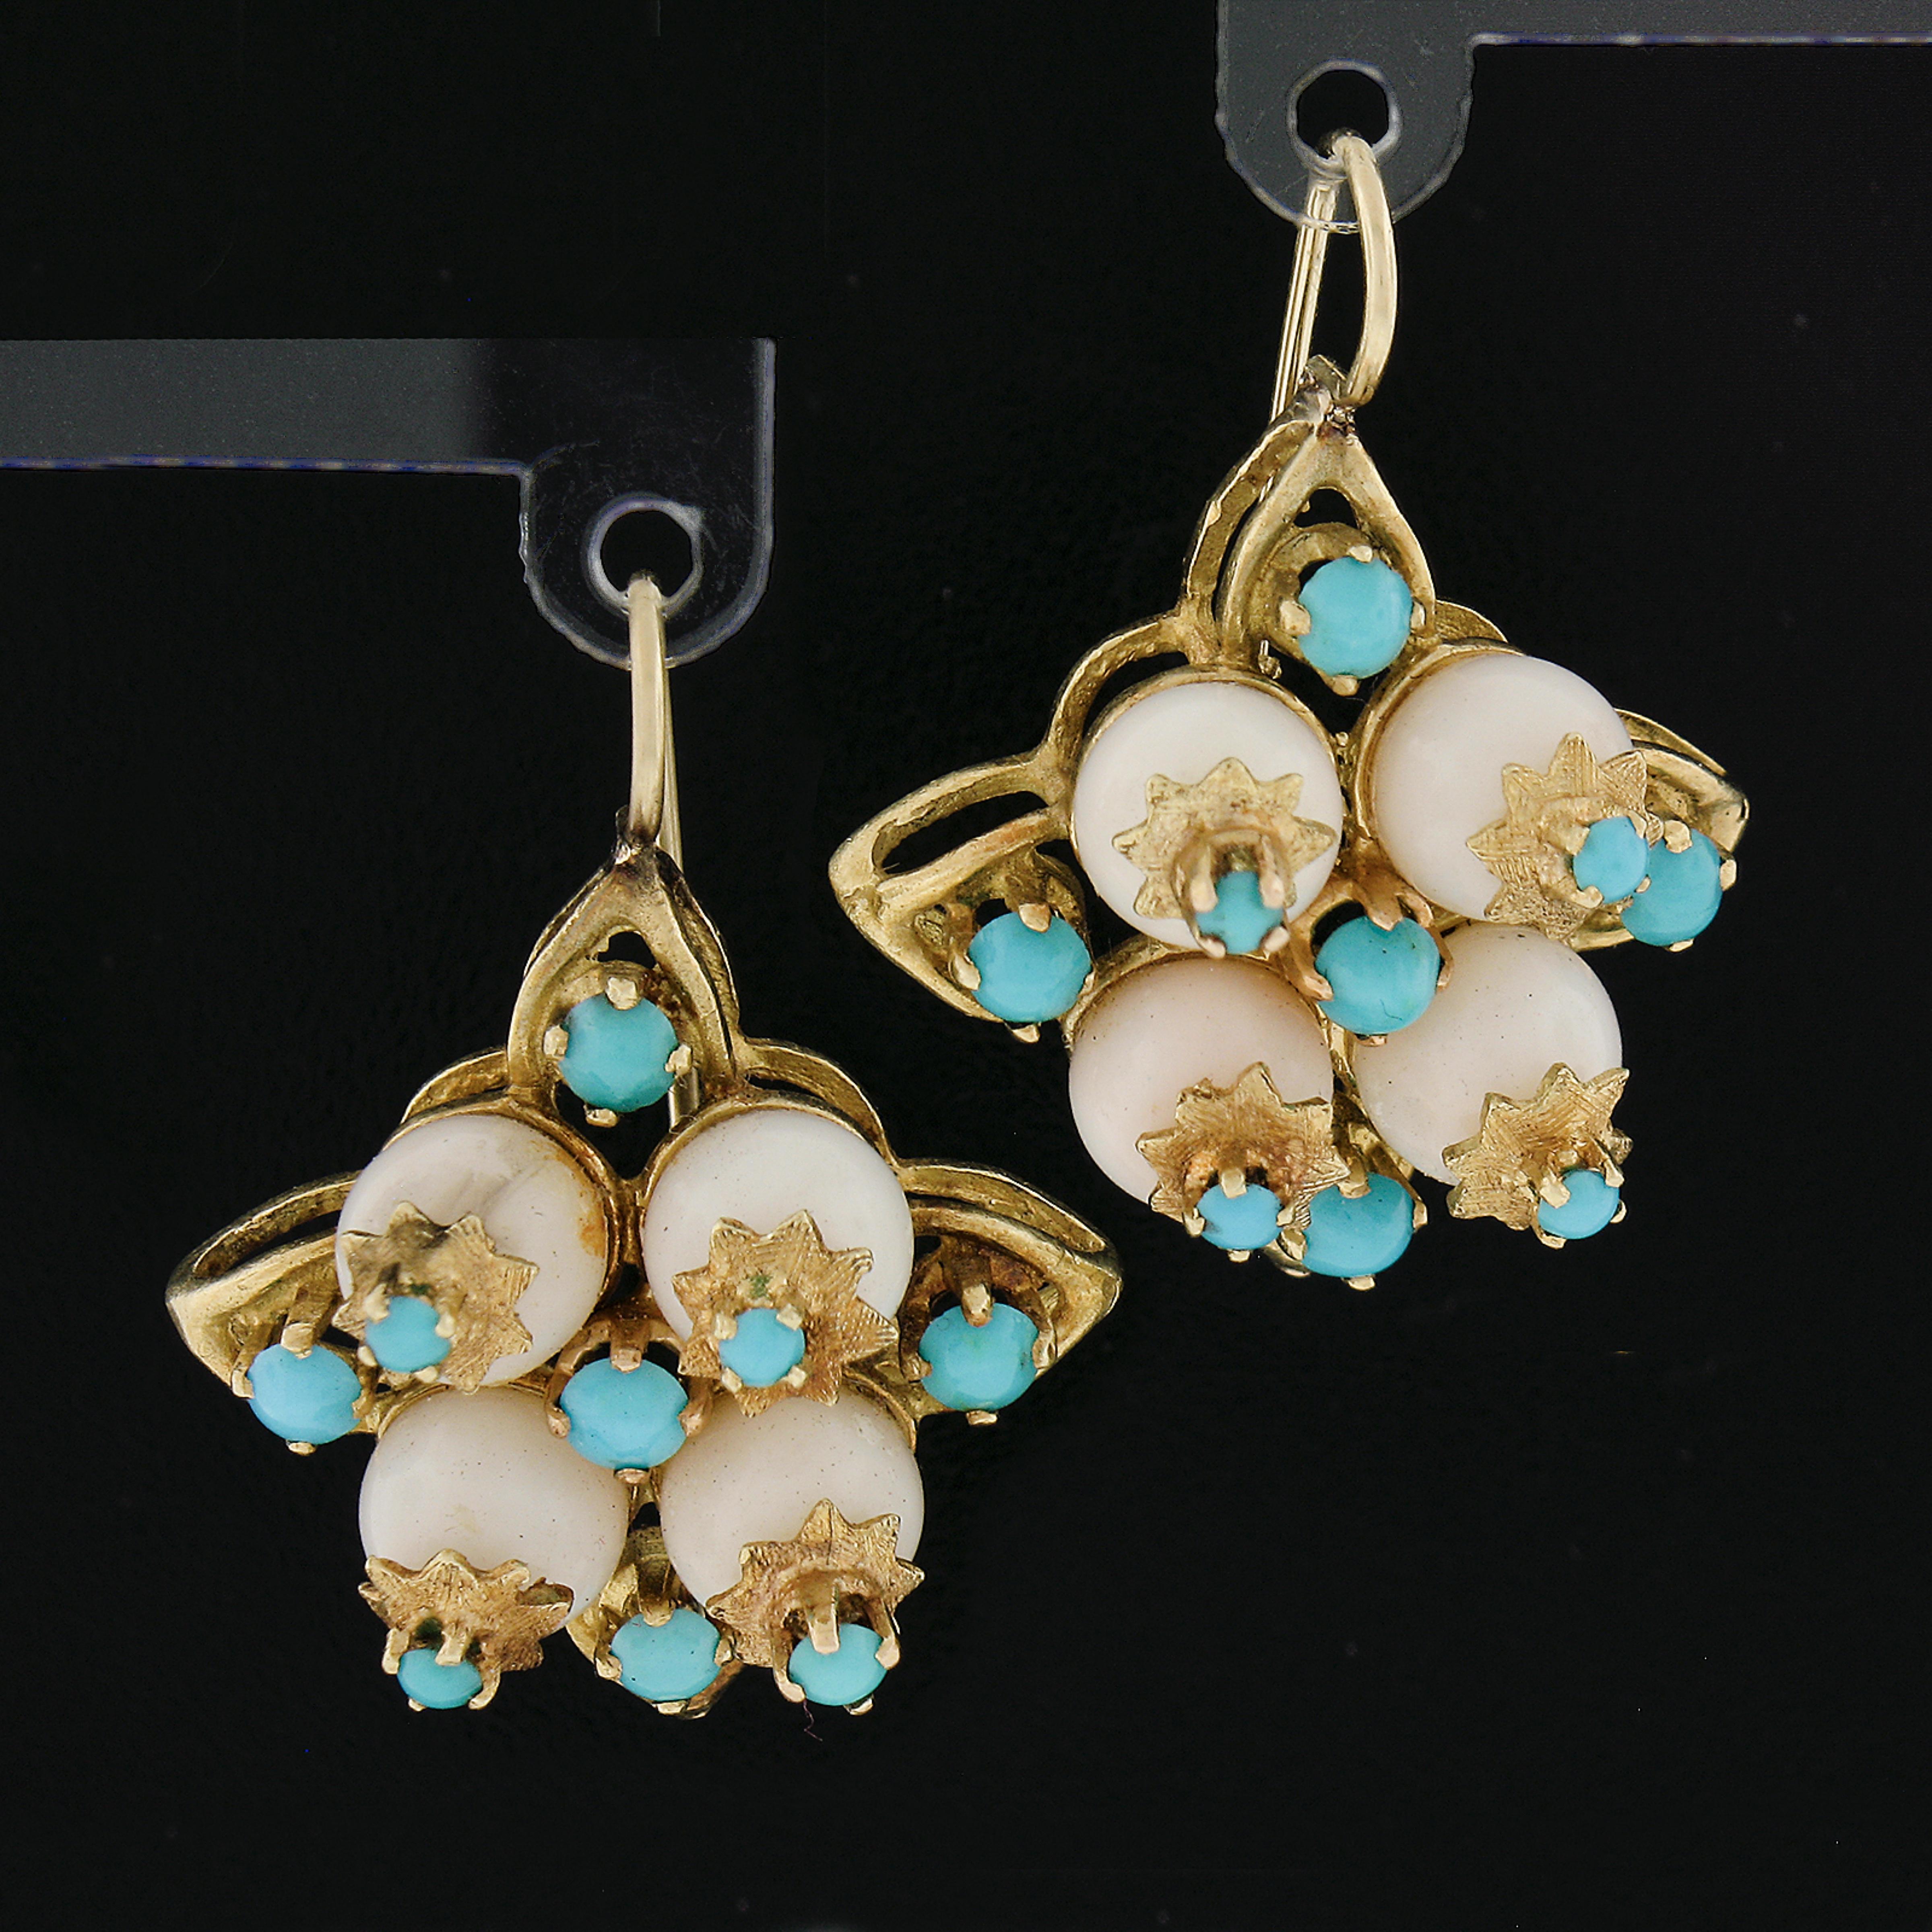 Here we have a beautiful pair of vintage drop dangle earrings that are crafted in solid 18k yellow gold. They each feature a 8 bead shape angel skin coral neatly sets in a floral basket design. The corals are adorned with 16 turquoises adding a